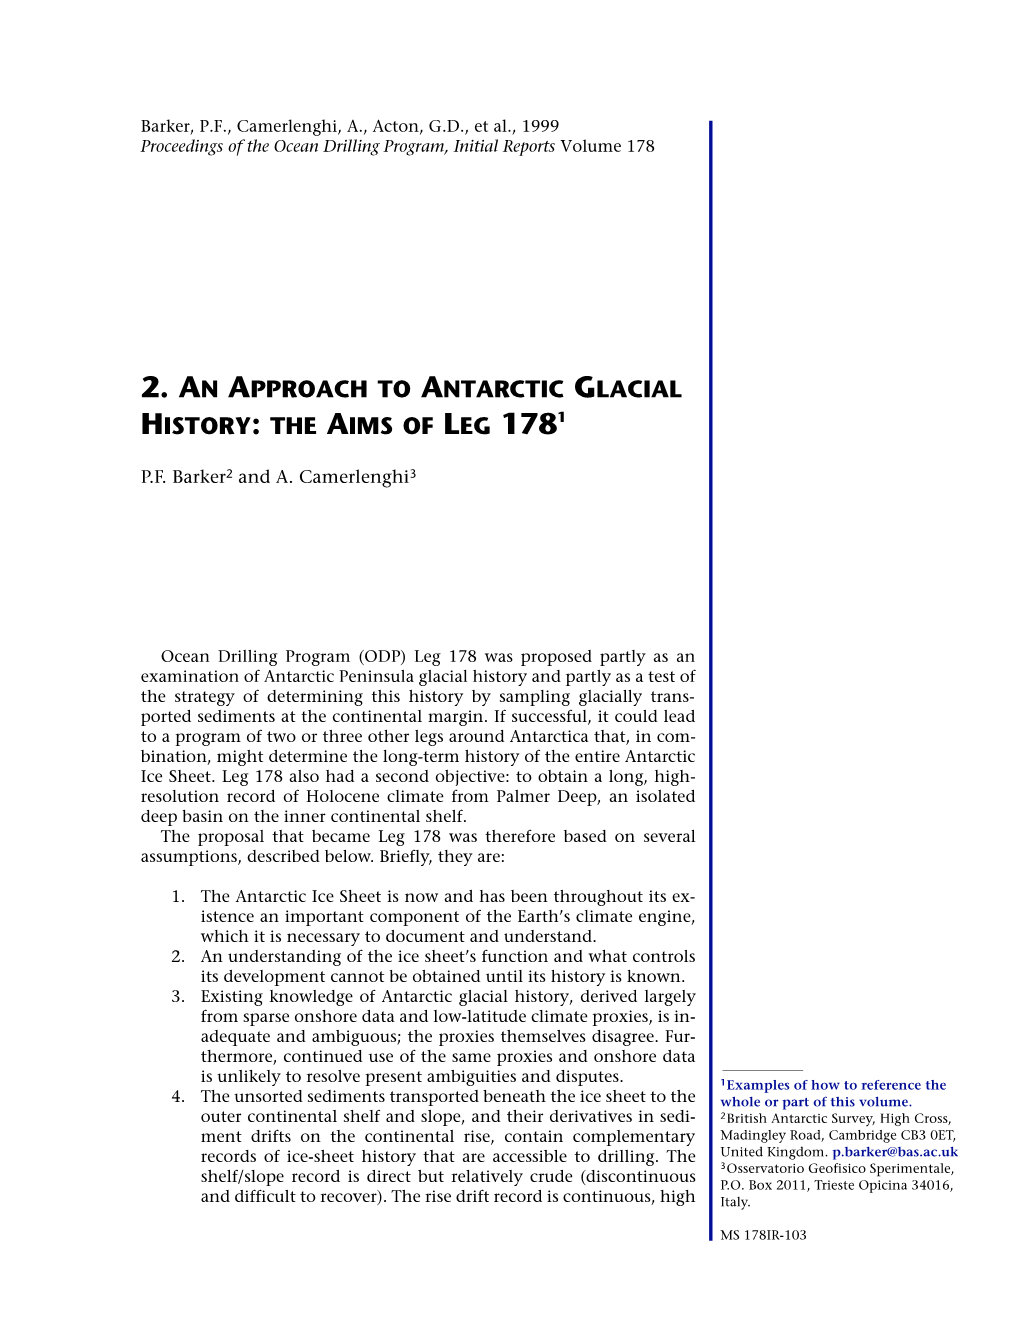 2. an Approach to Antarctic Glacial History: the Aims of Leg 1781